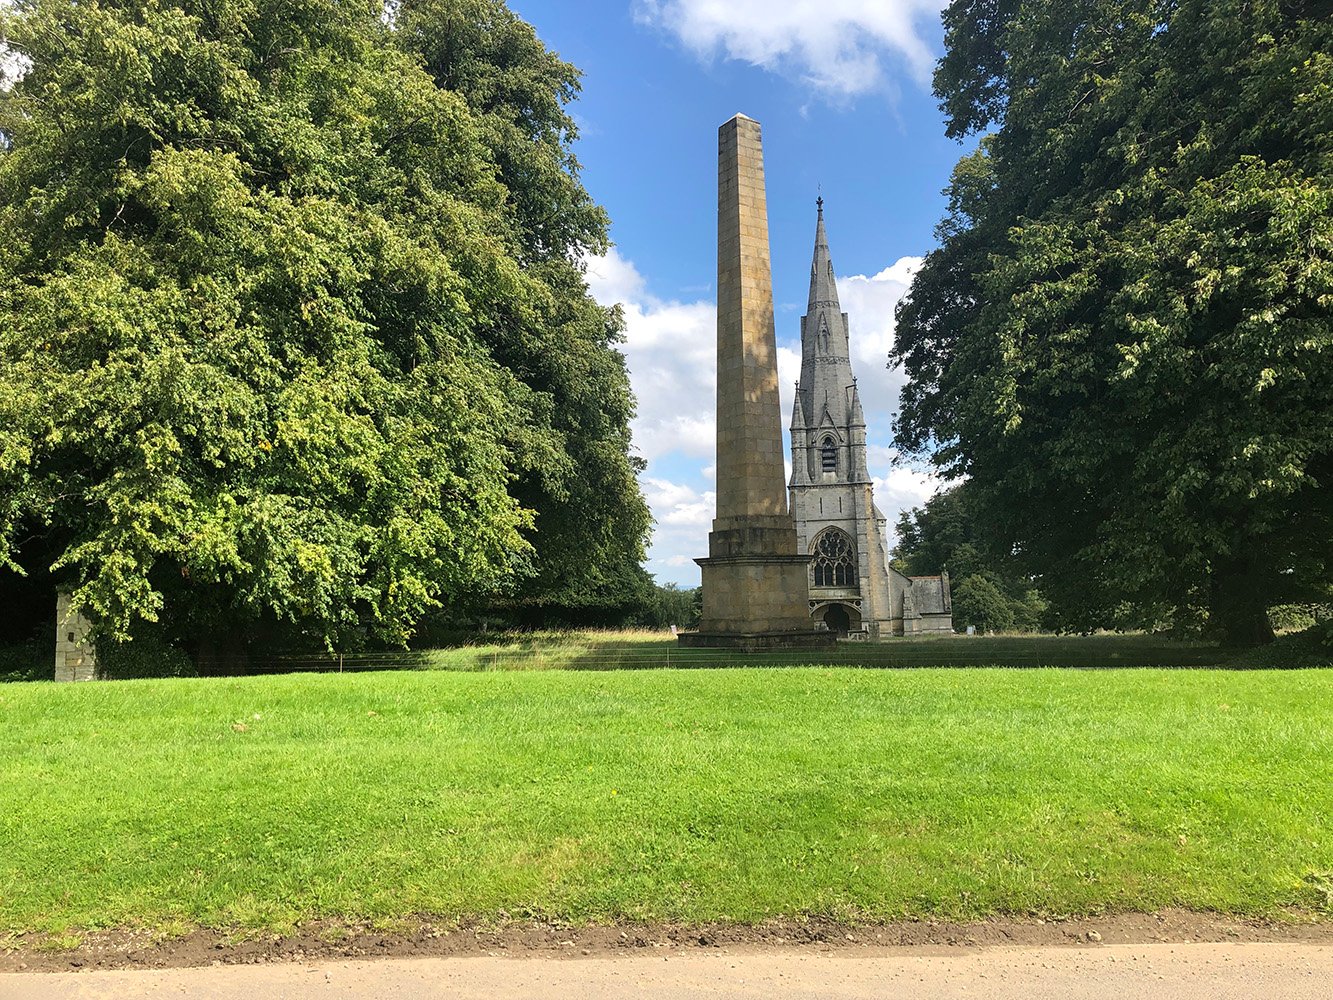 Image name obelisk and church studley royal fountains abbey north yorkshire the 6 image from the post A look at the history of Studley Royal, North Yorkshire, with Dr Emma Wells in Yorkshire.com.